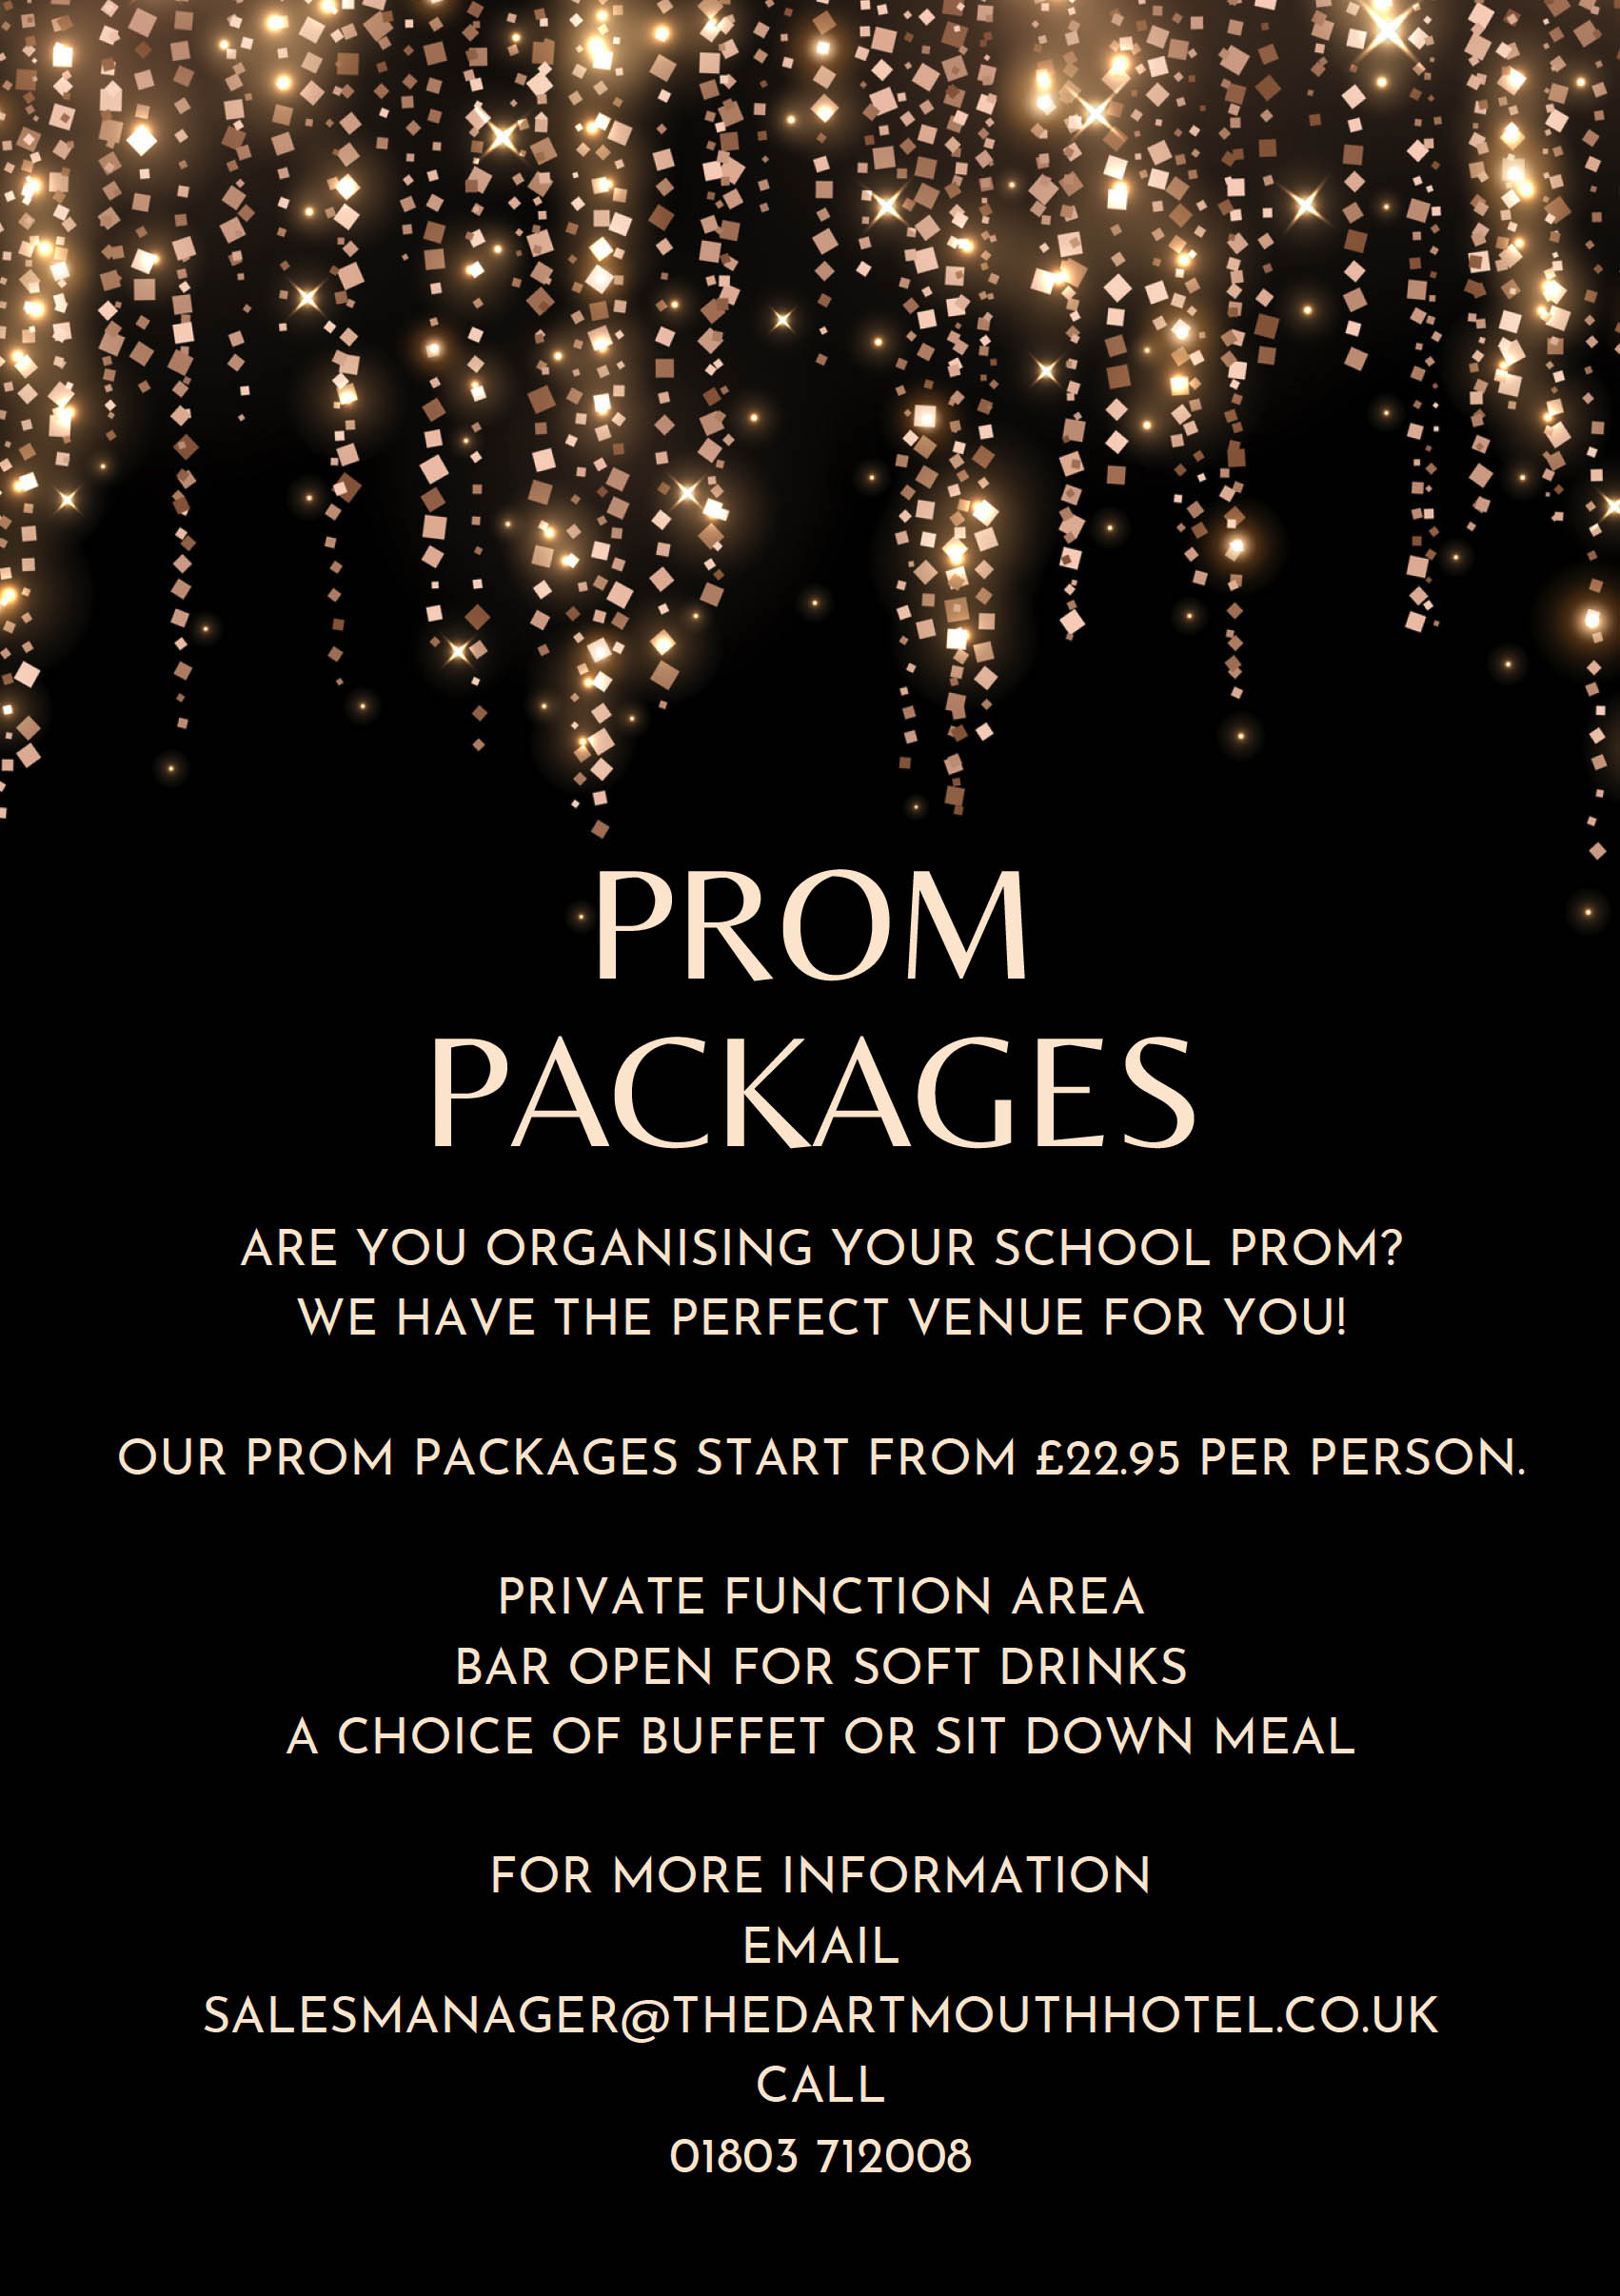 Prom Packages at The Dartmouth Hotel Golf & Spa